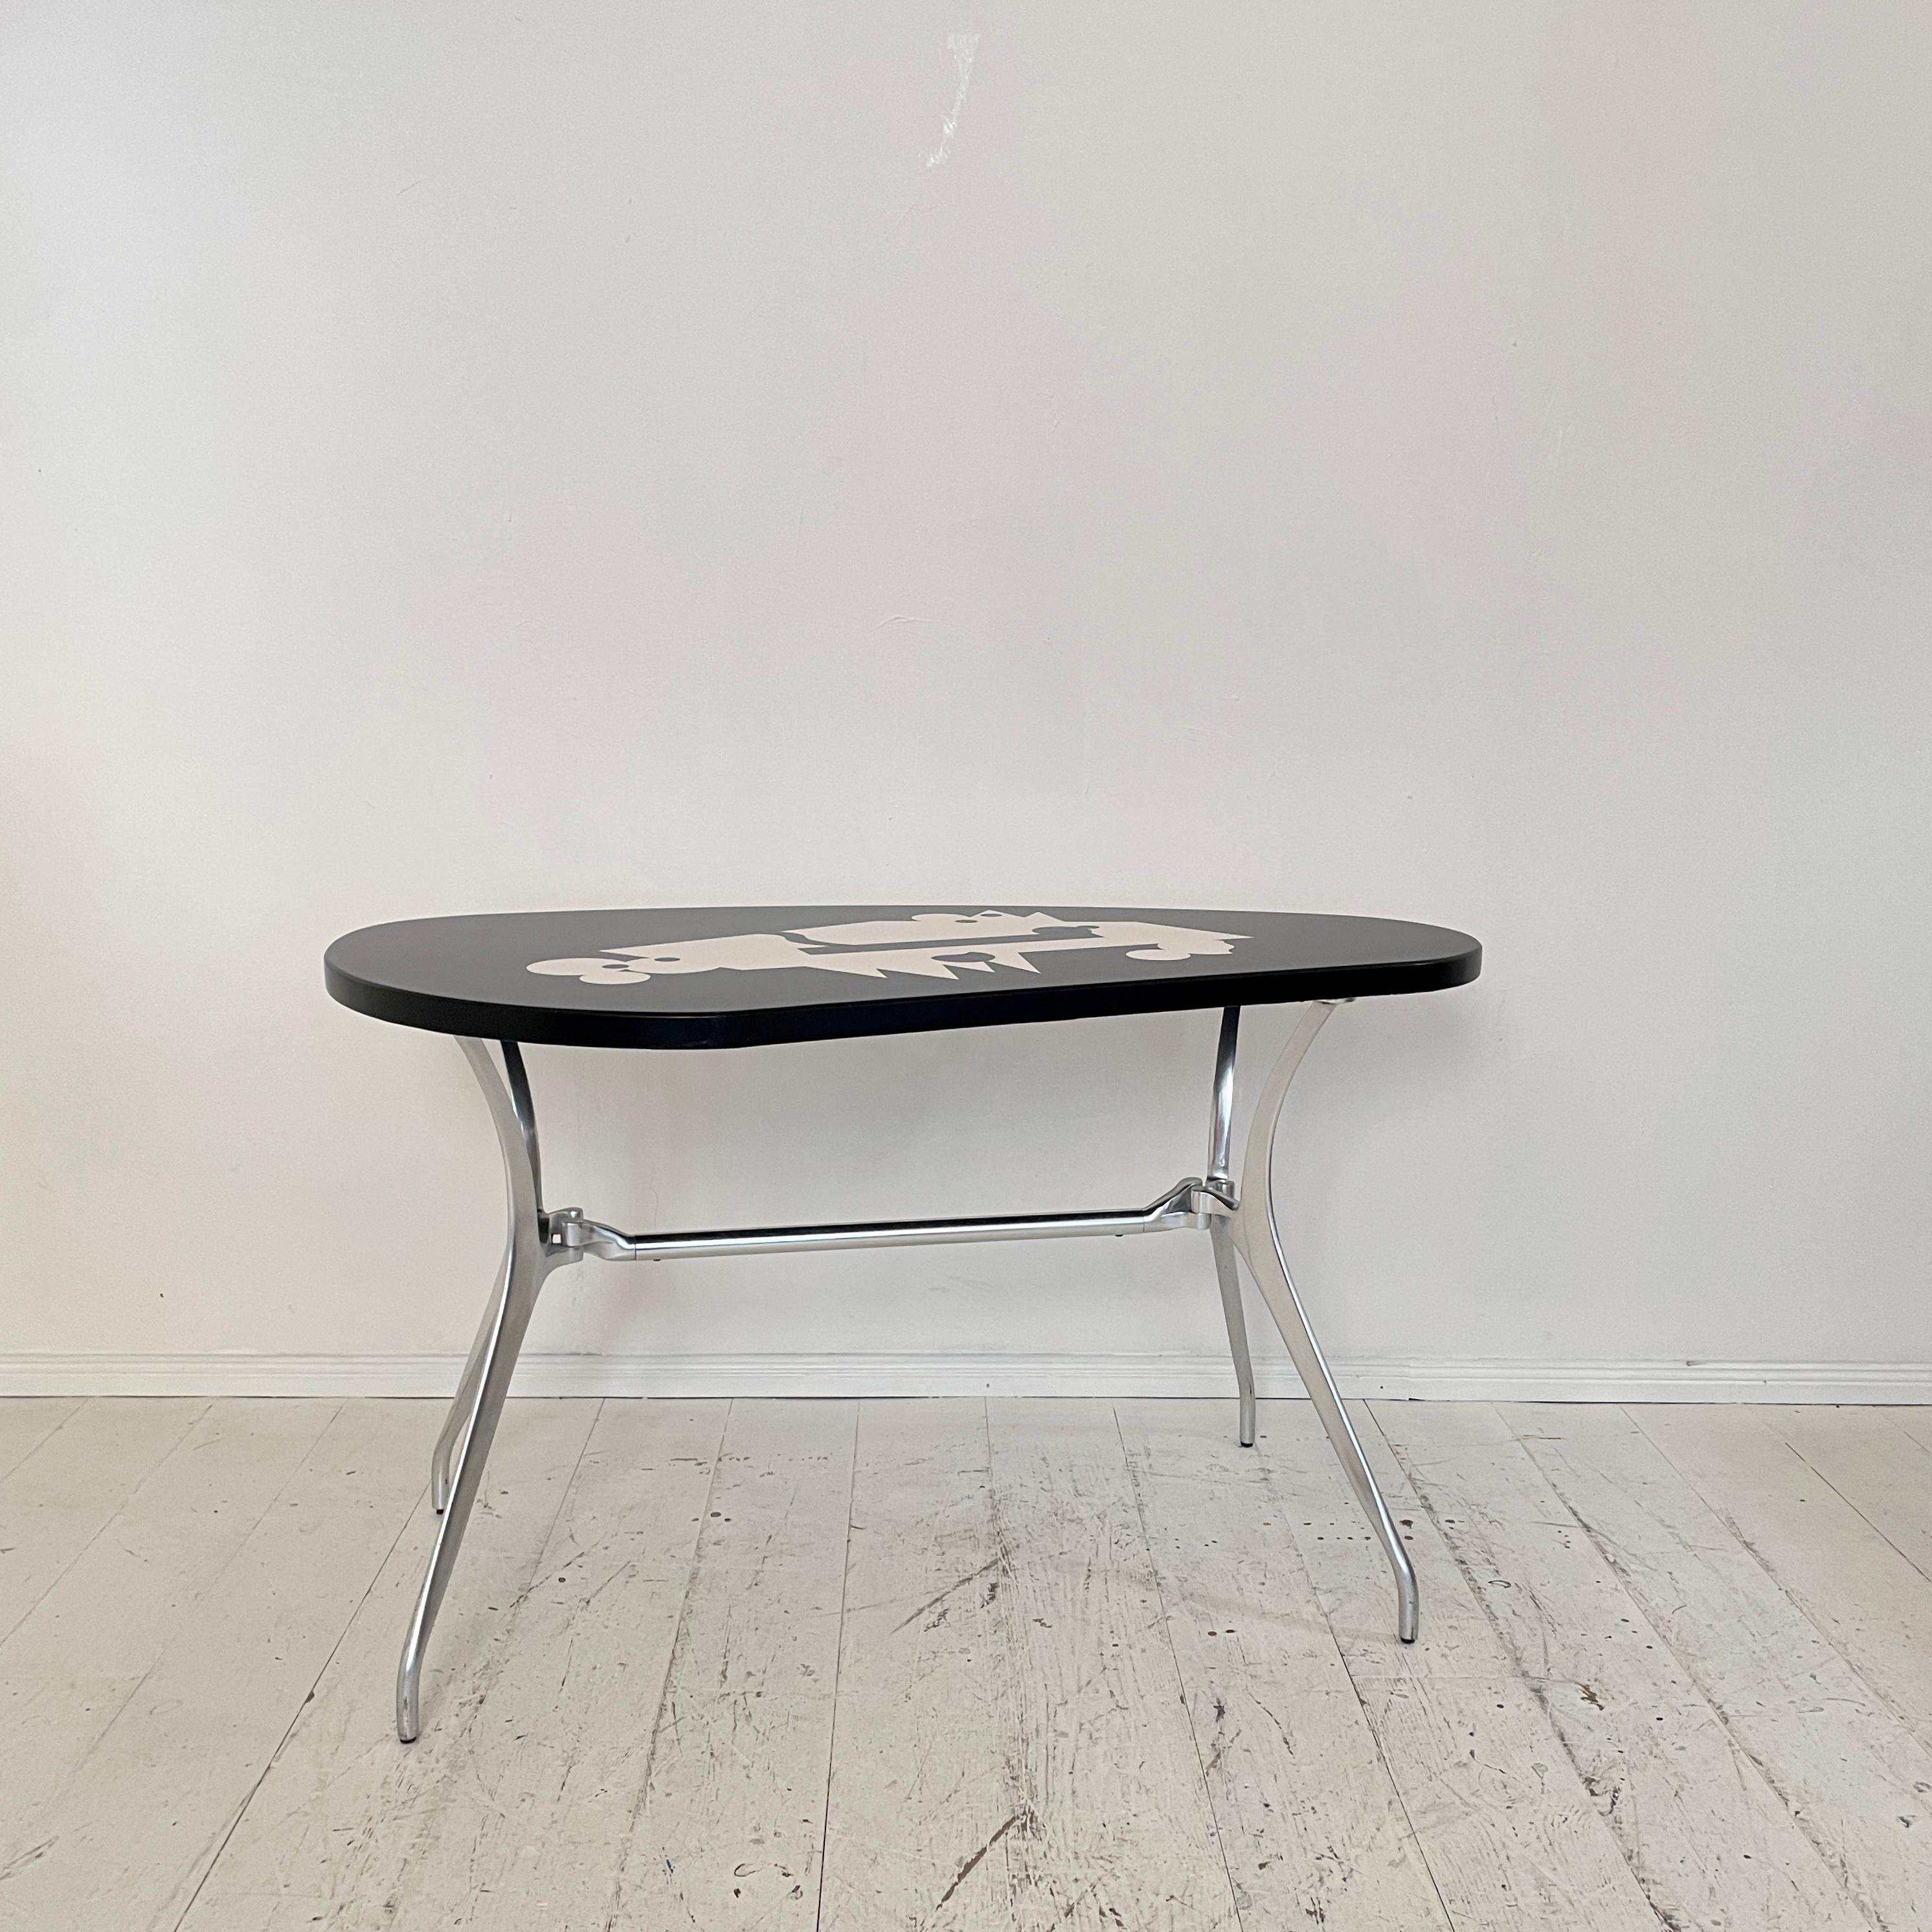 Late 20th Century Post-Modern Italian Aluminum Desk or Console Table with Painted Top, 1982